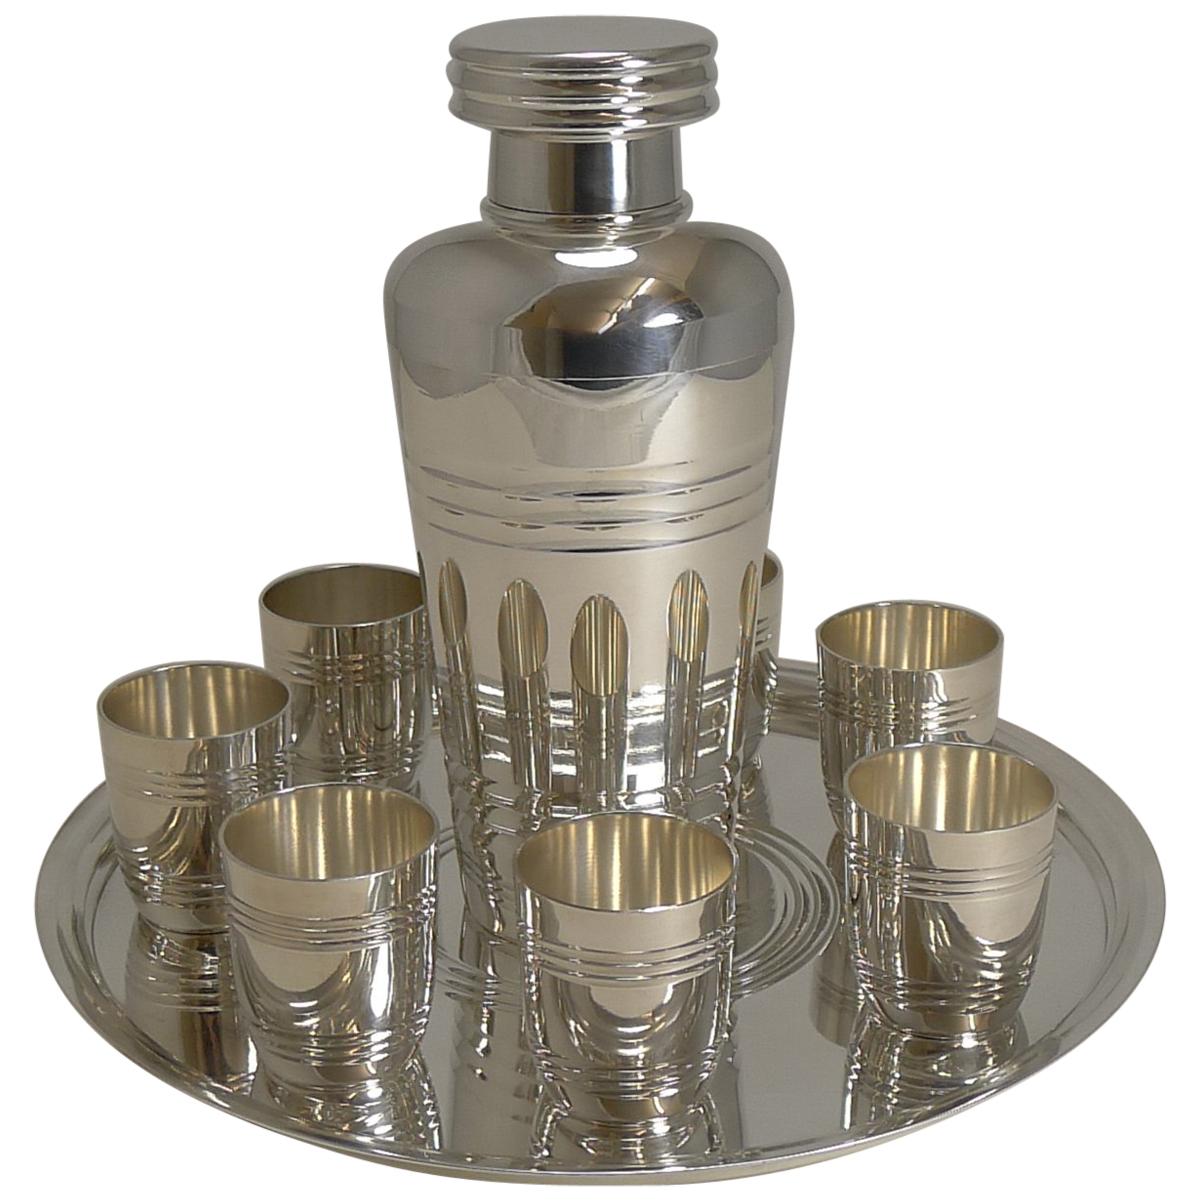 French Art Deco Silver Plated Cocktail Set by St. Medard, Paris c.1935